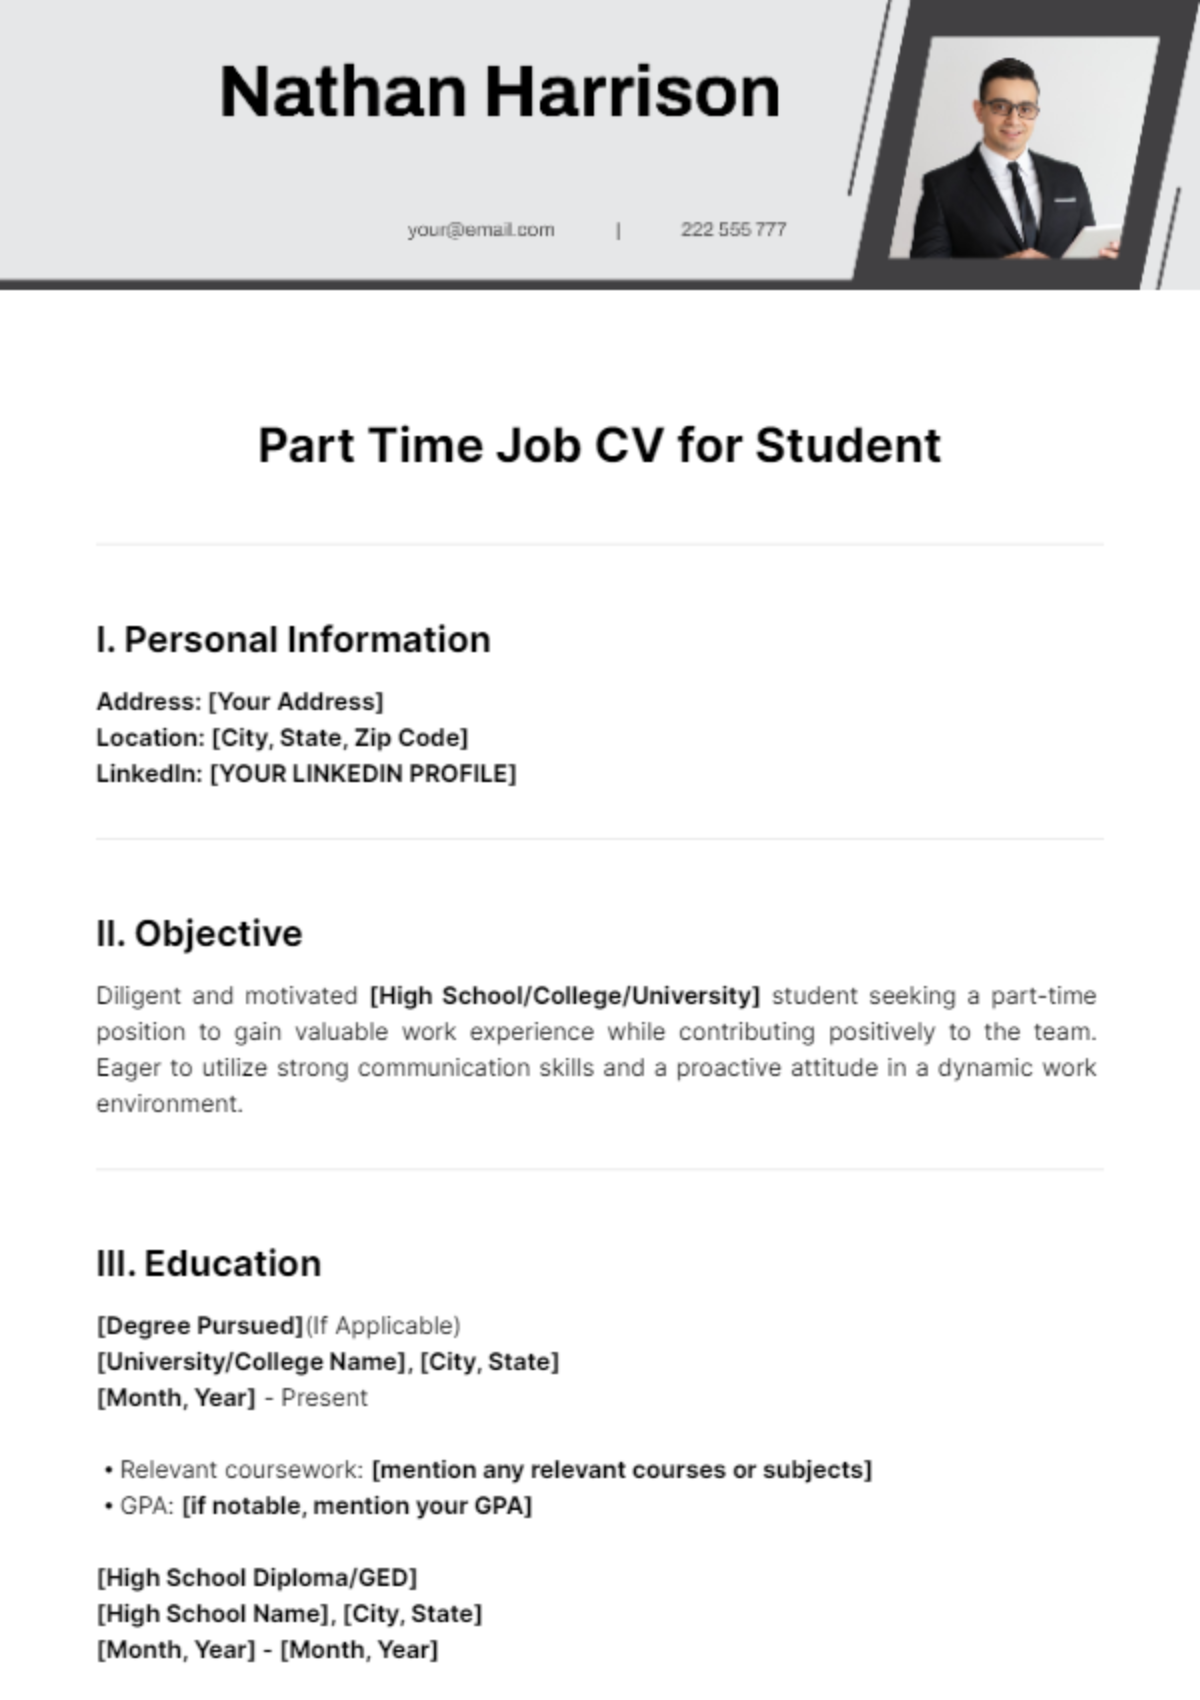 Free Part Time Job CV for Student Template